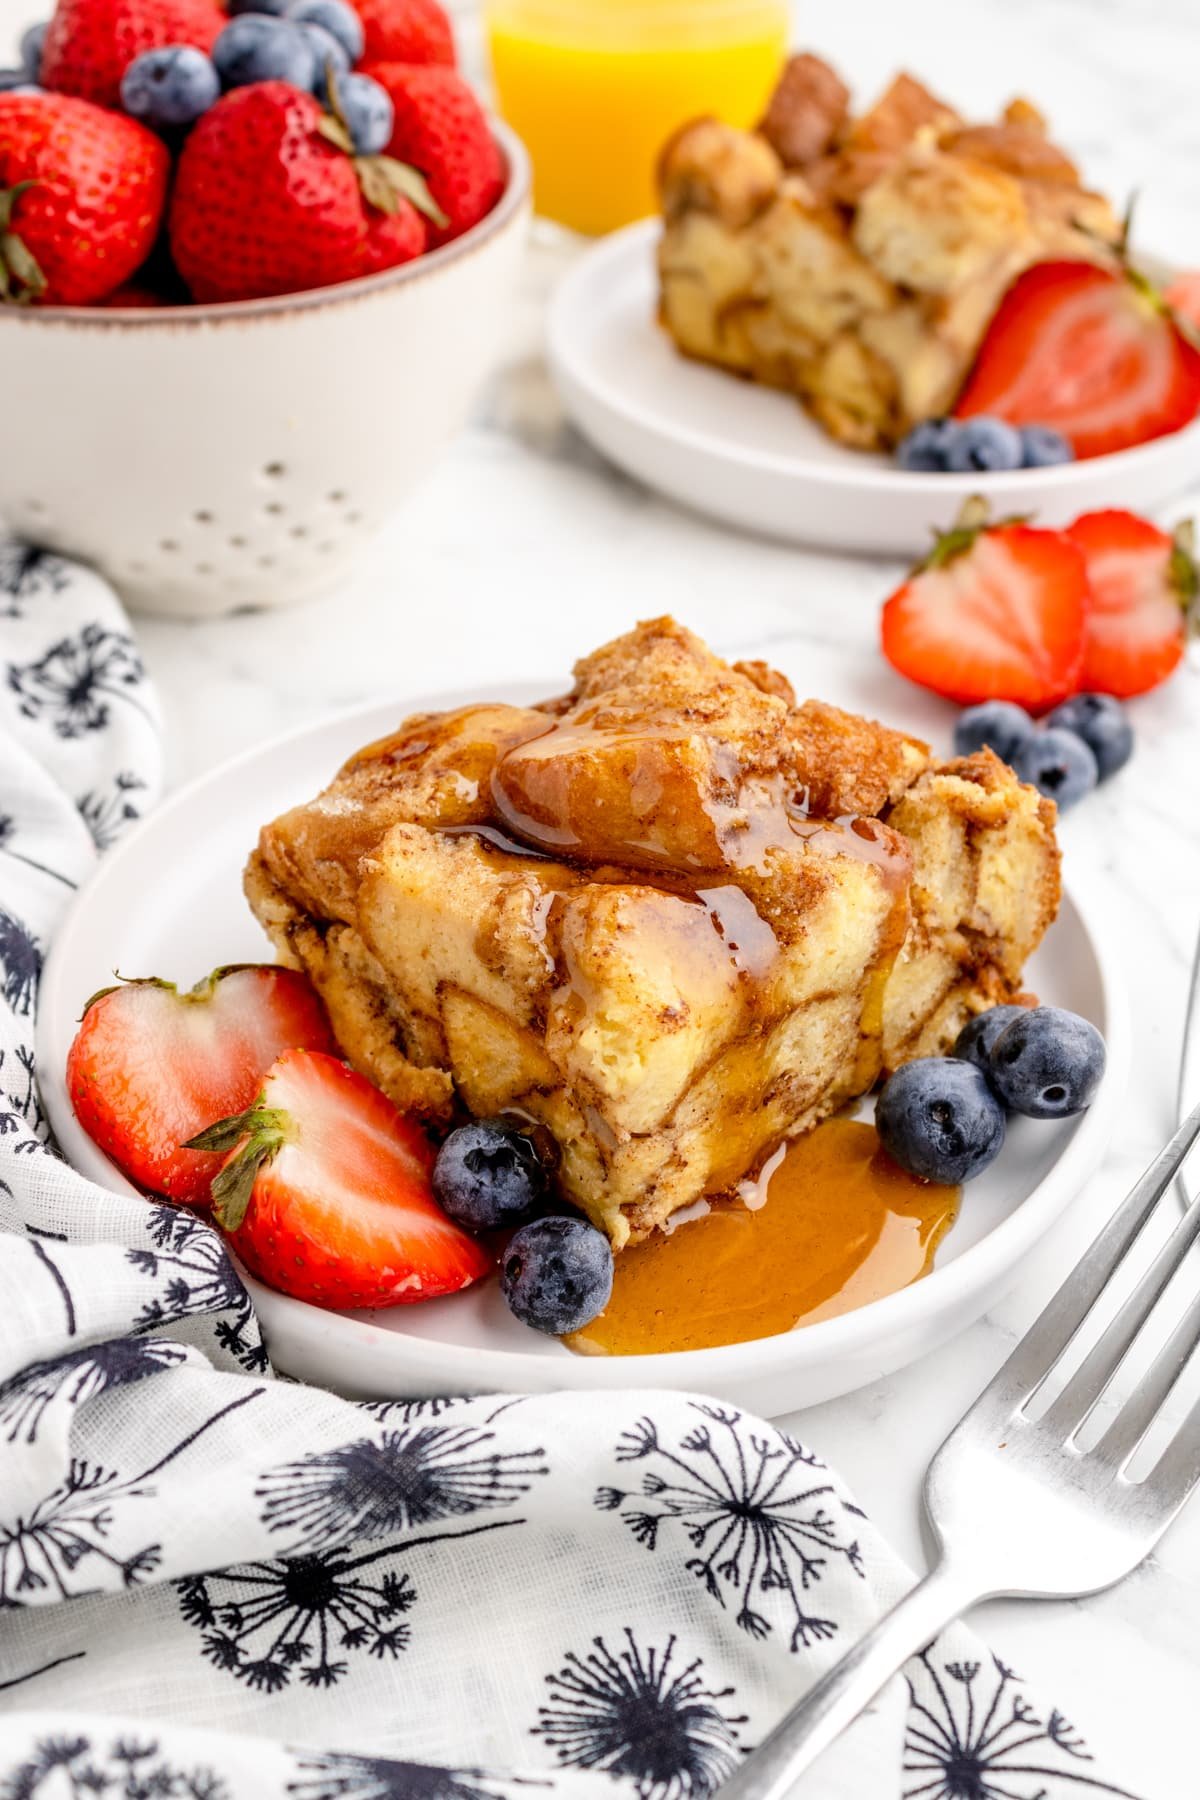 A square of French toast drizzled with maple syrup and garnished with berries.